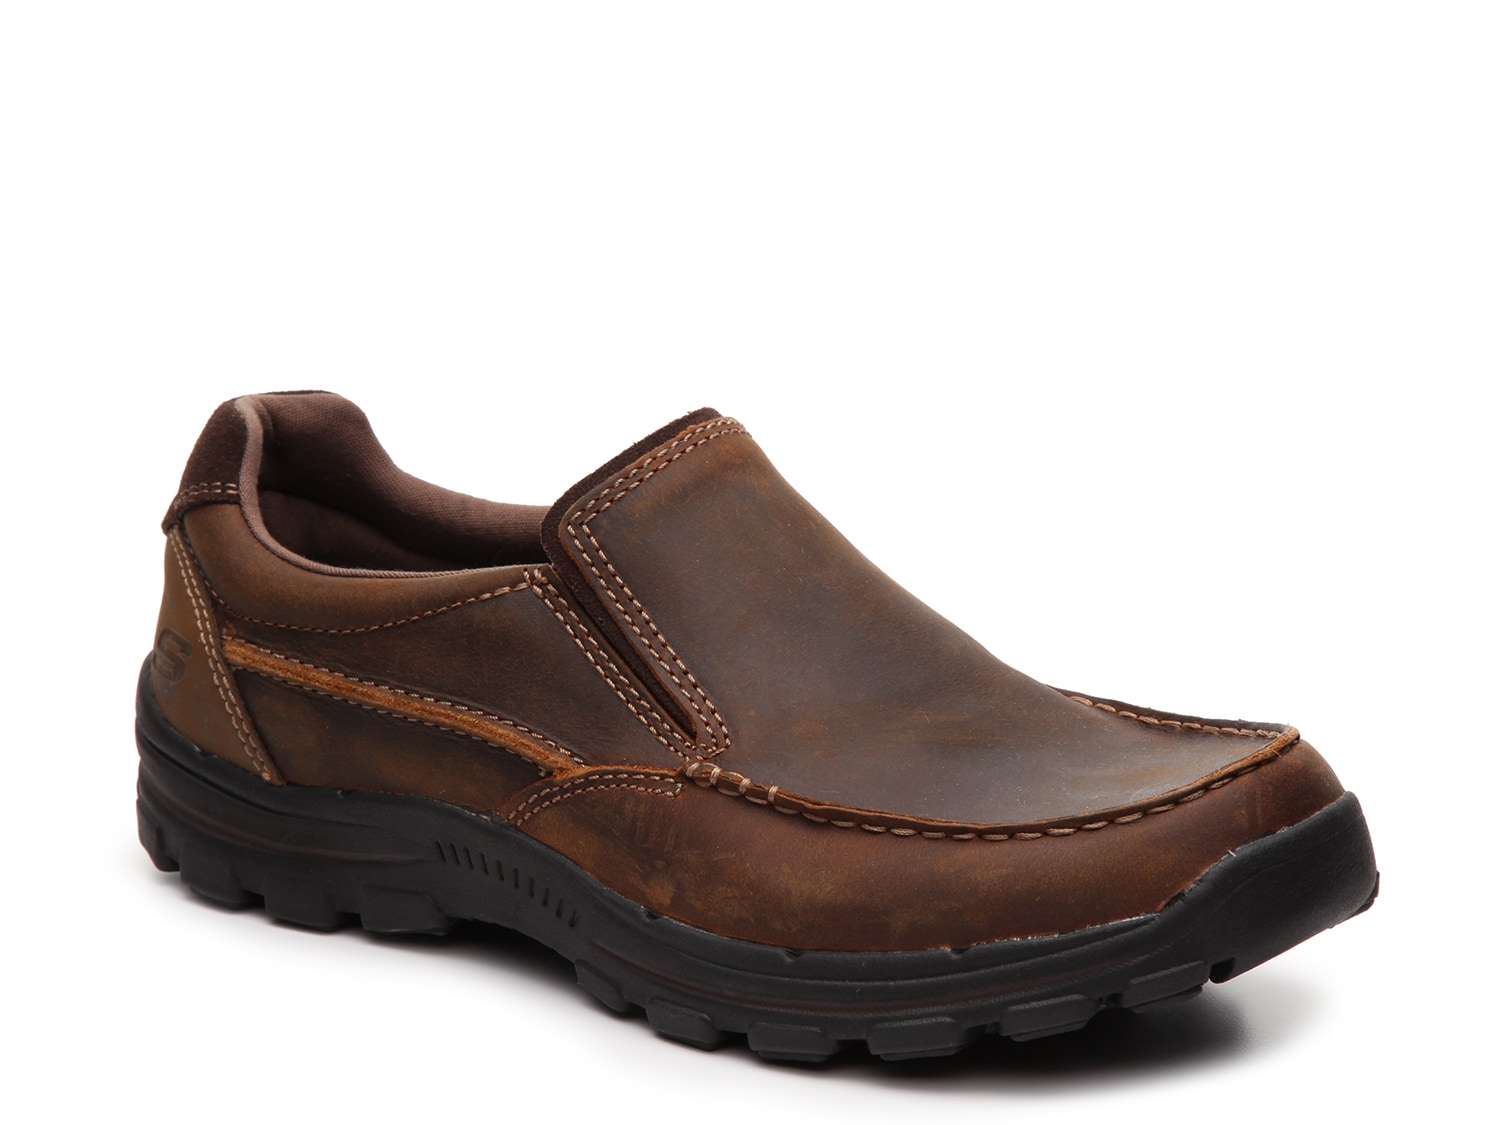 skechers relaxed fit segment the search men's loafers